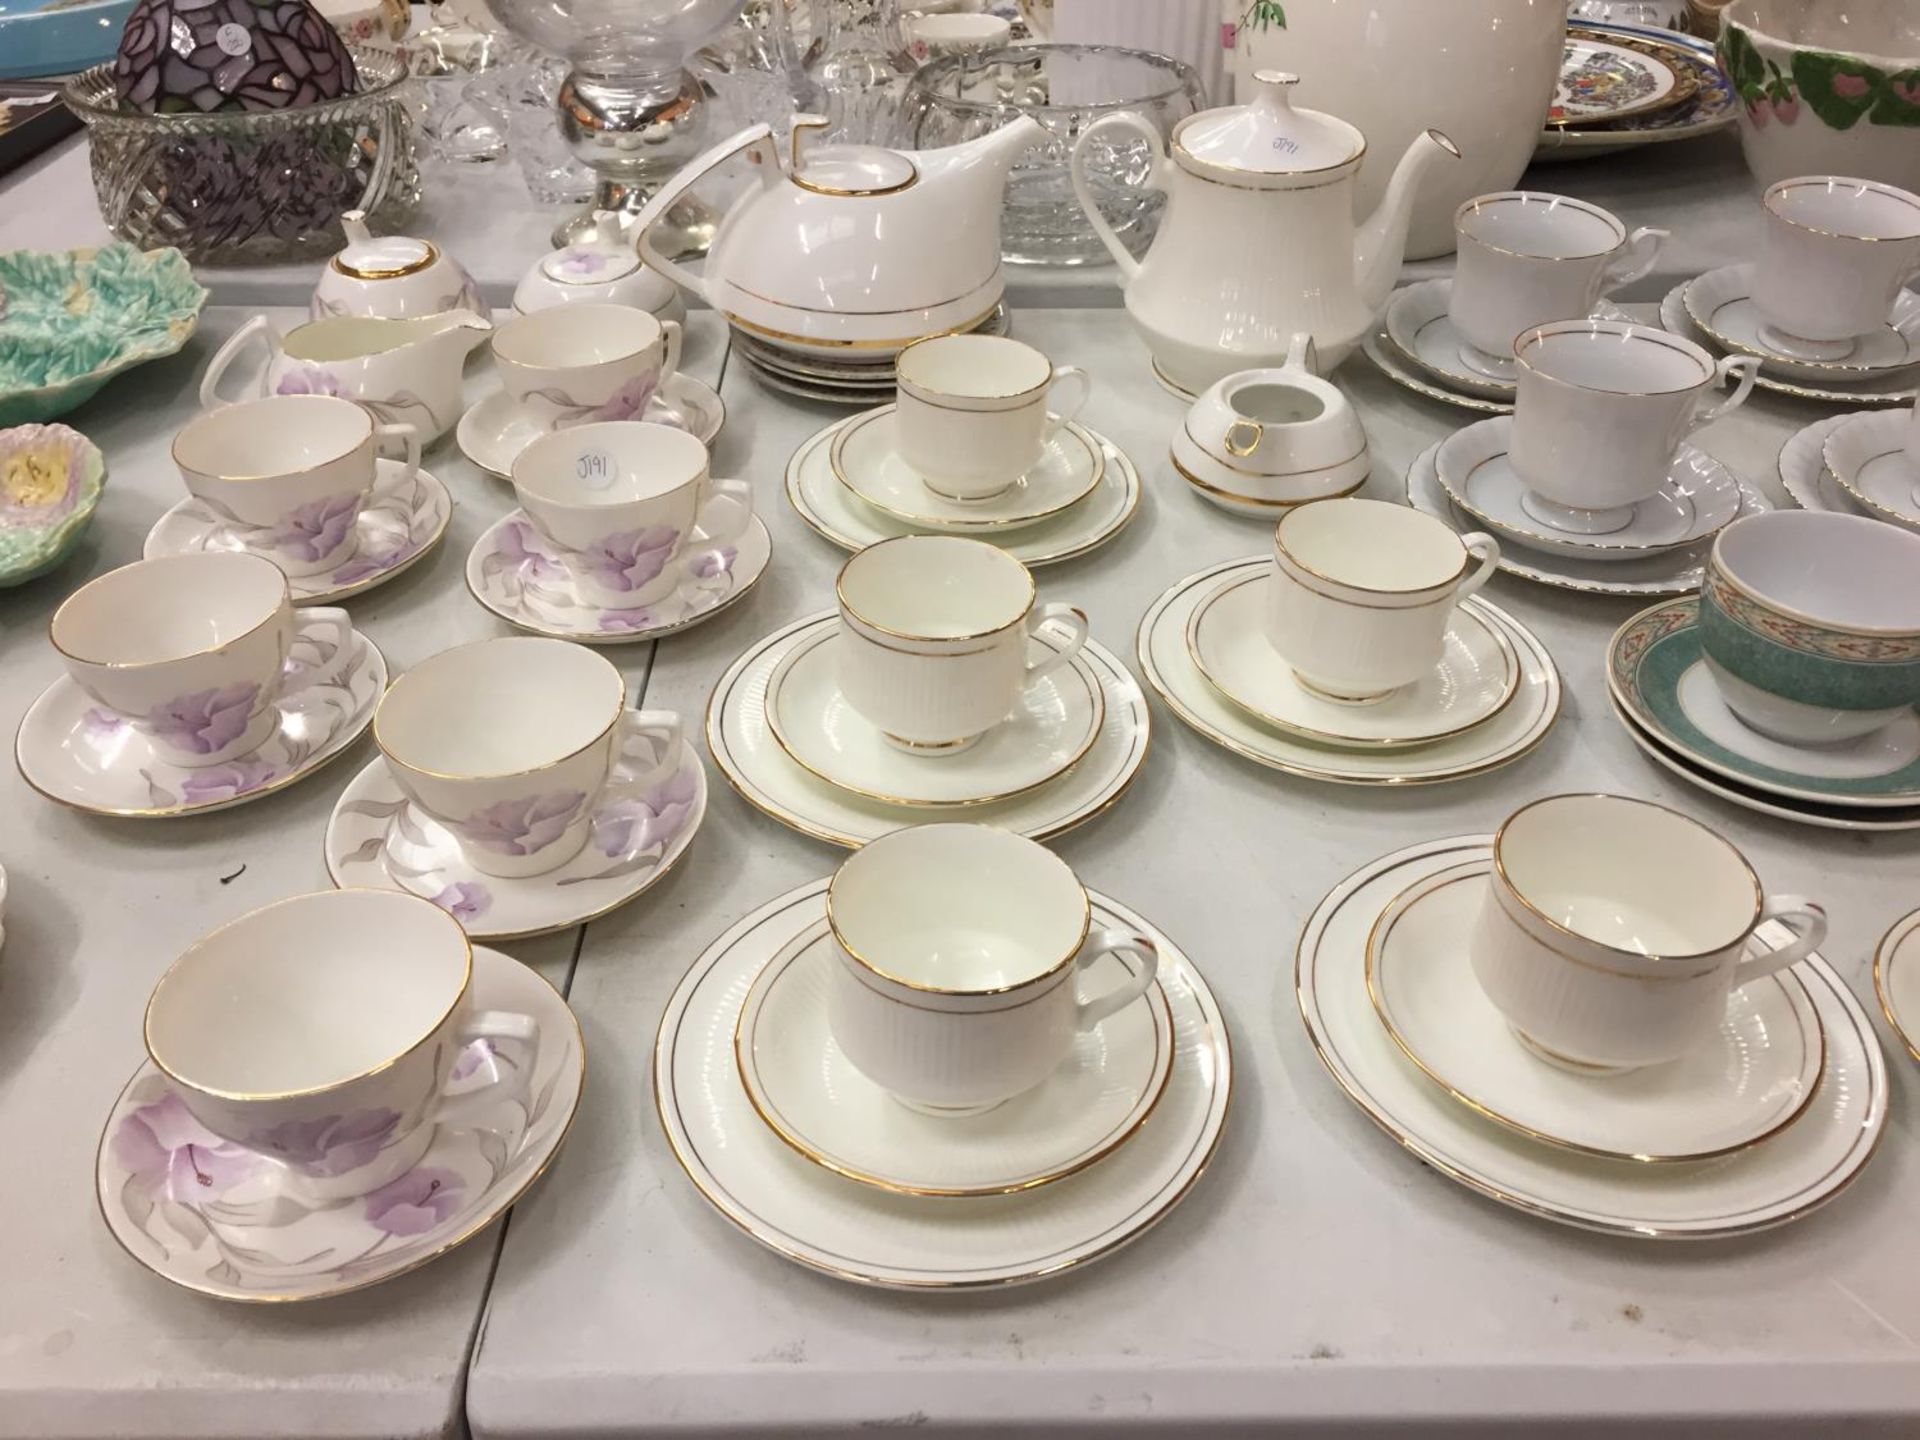 A LARGE COLLECTION OF VARIOUS TEA CUPS AND SAUCERS OF VARIOUS DESIGNS AND TWO TEAPOTS - Image 3 of 4